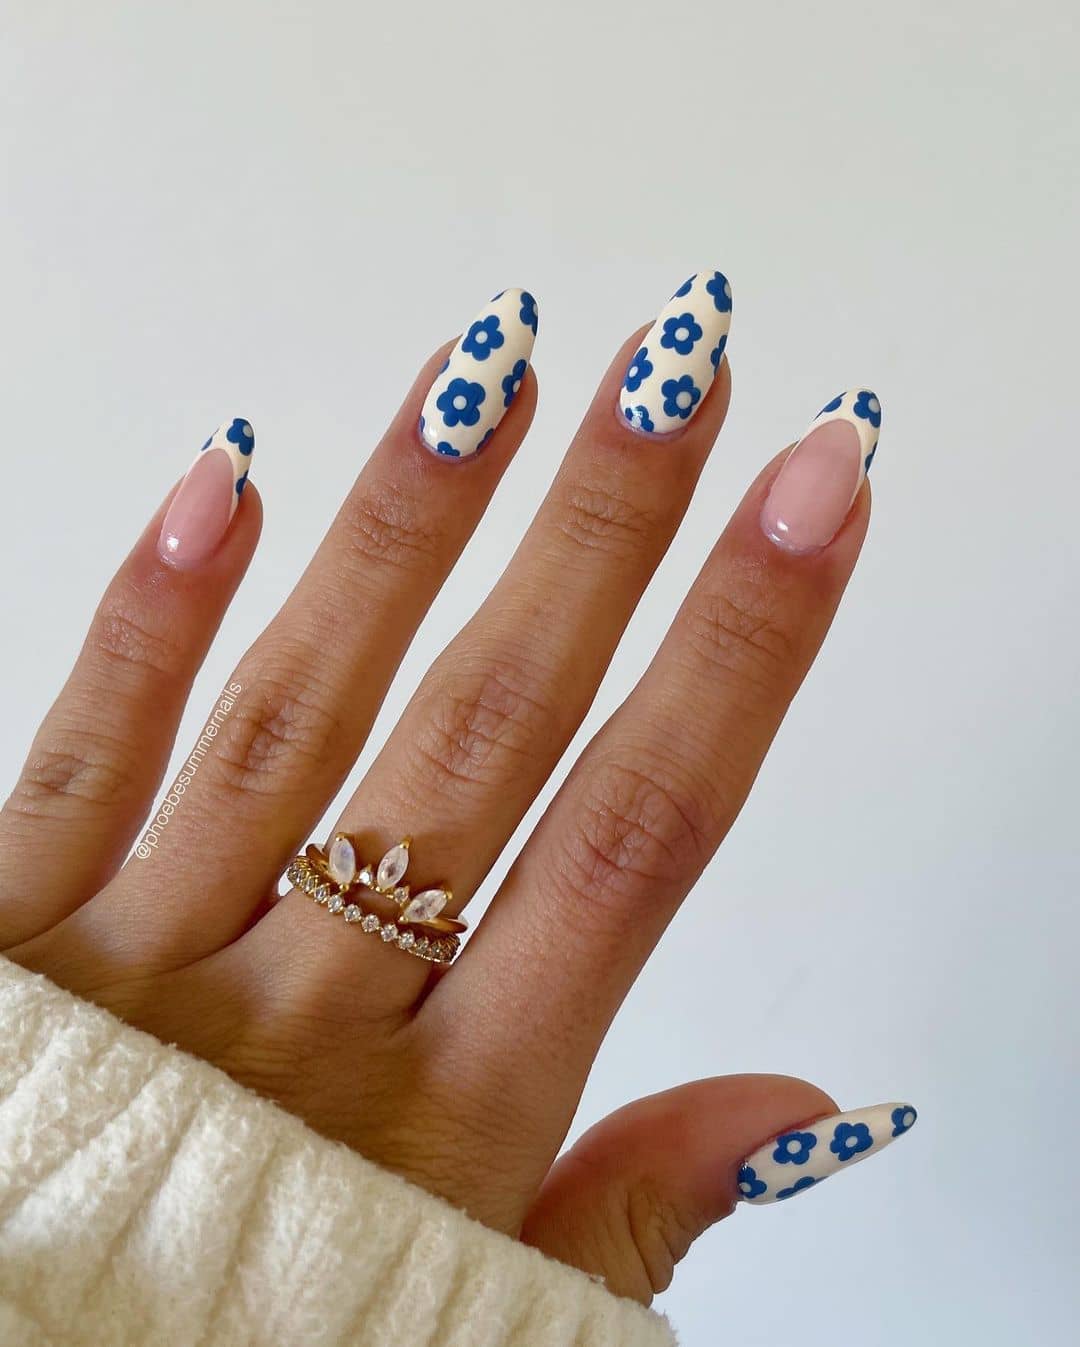 Over 100 Bright Summer Nail Art Designs That Will Be So Trendy images 76